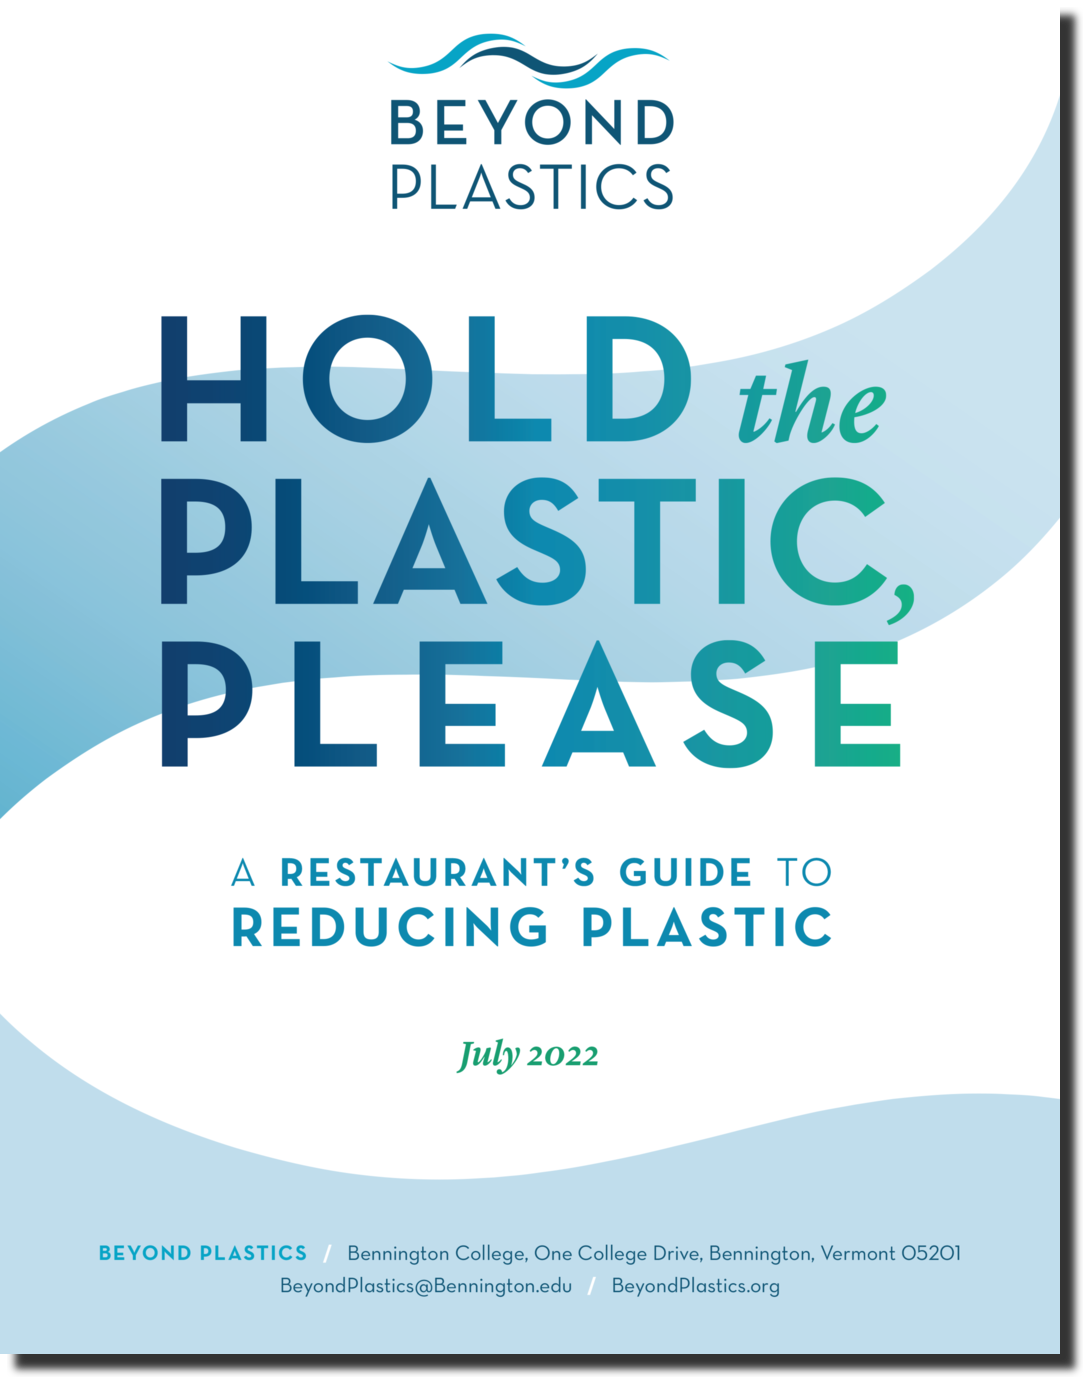 Beyond Plastics Releases Free Guide to Help Restaurants Reduce Their Use of Plastics